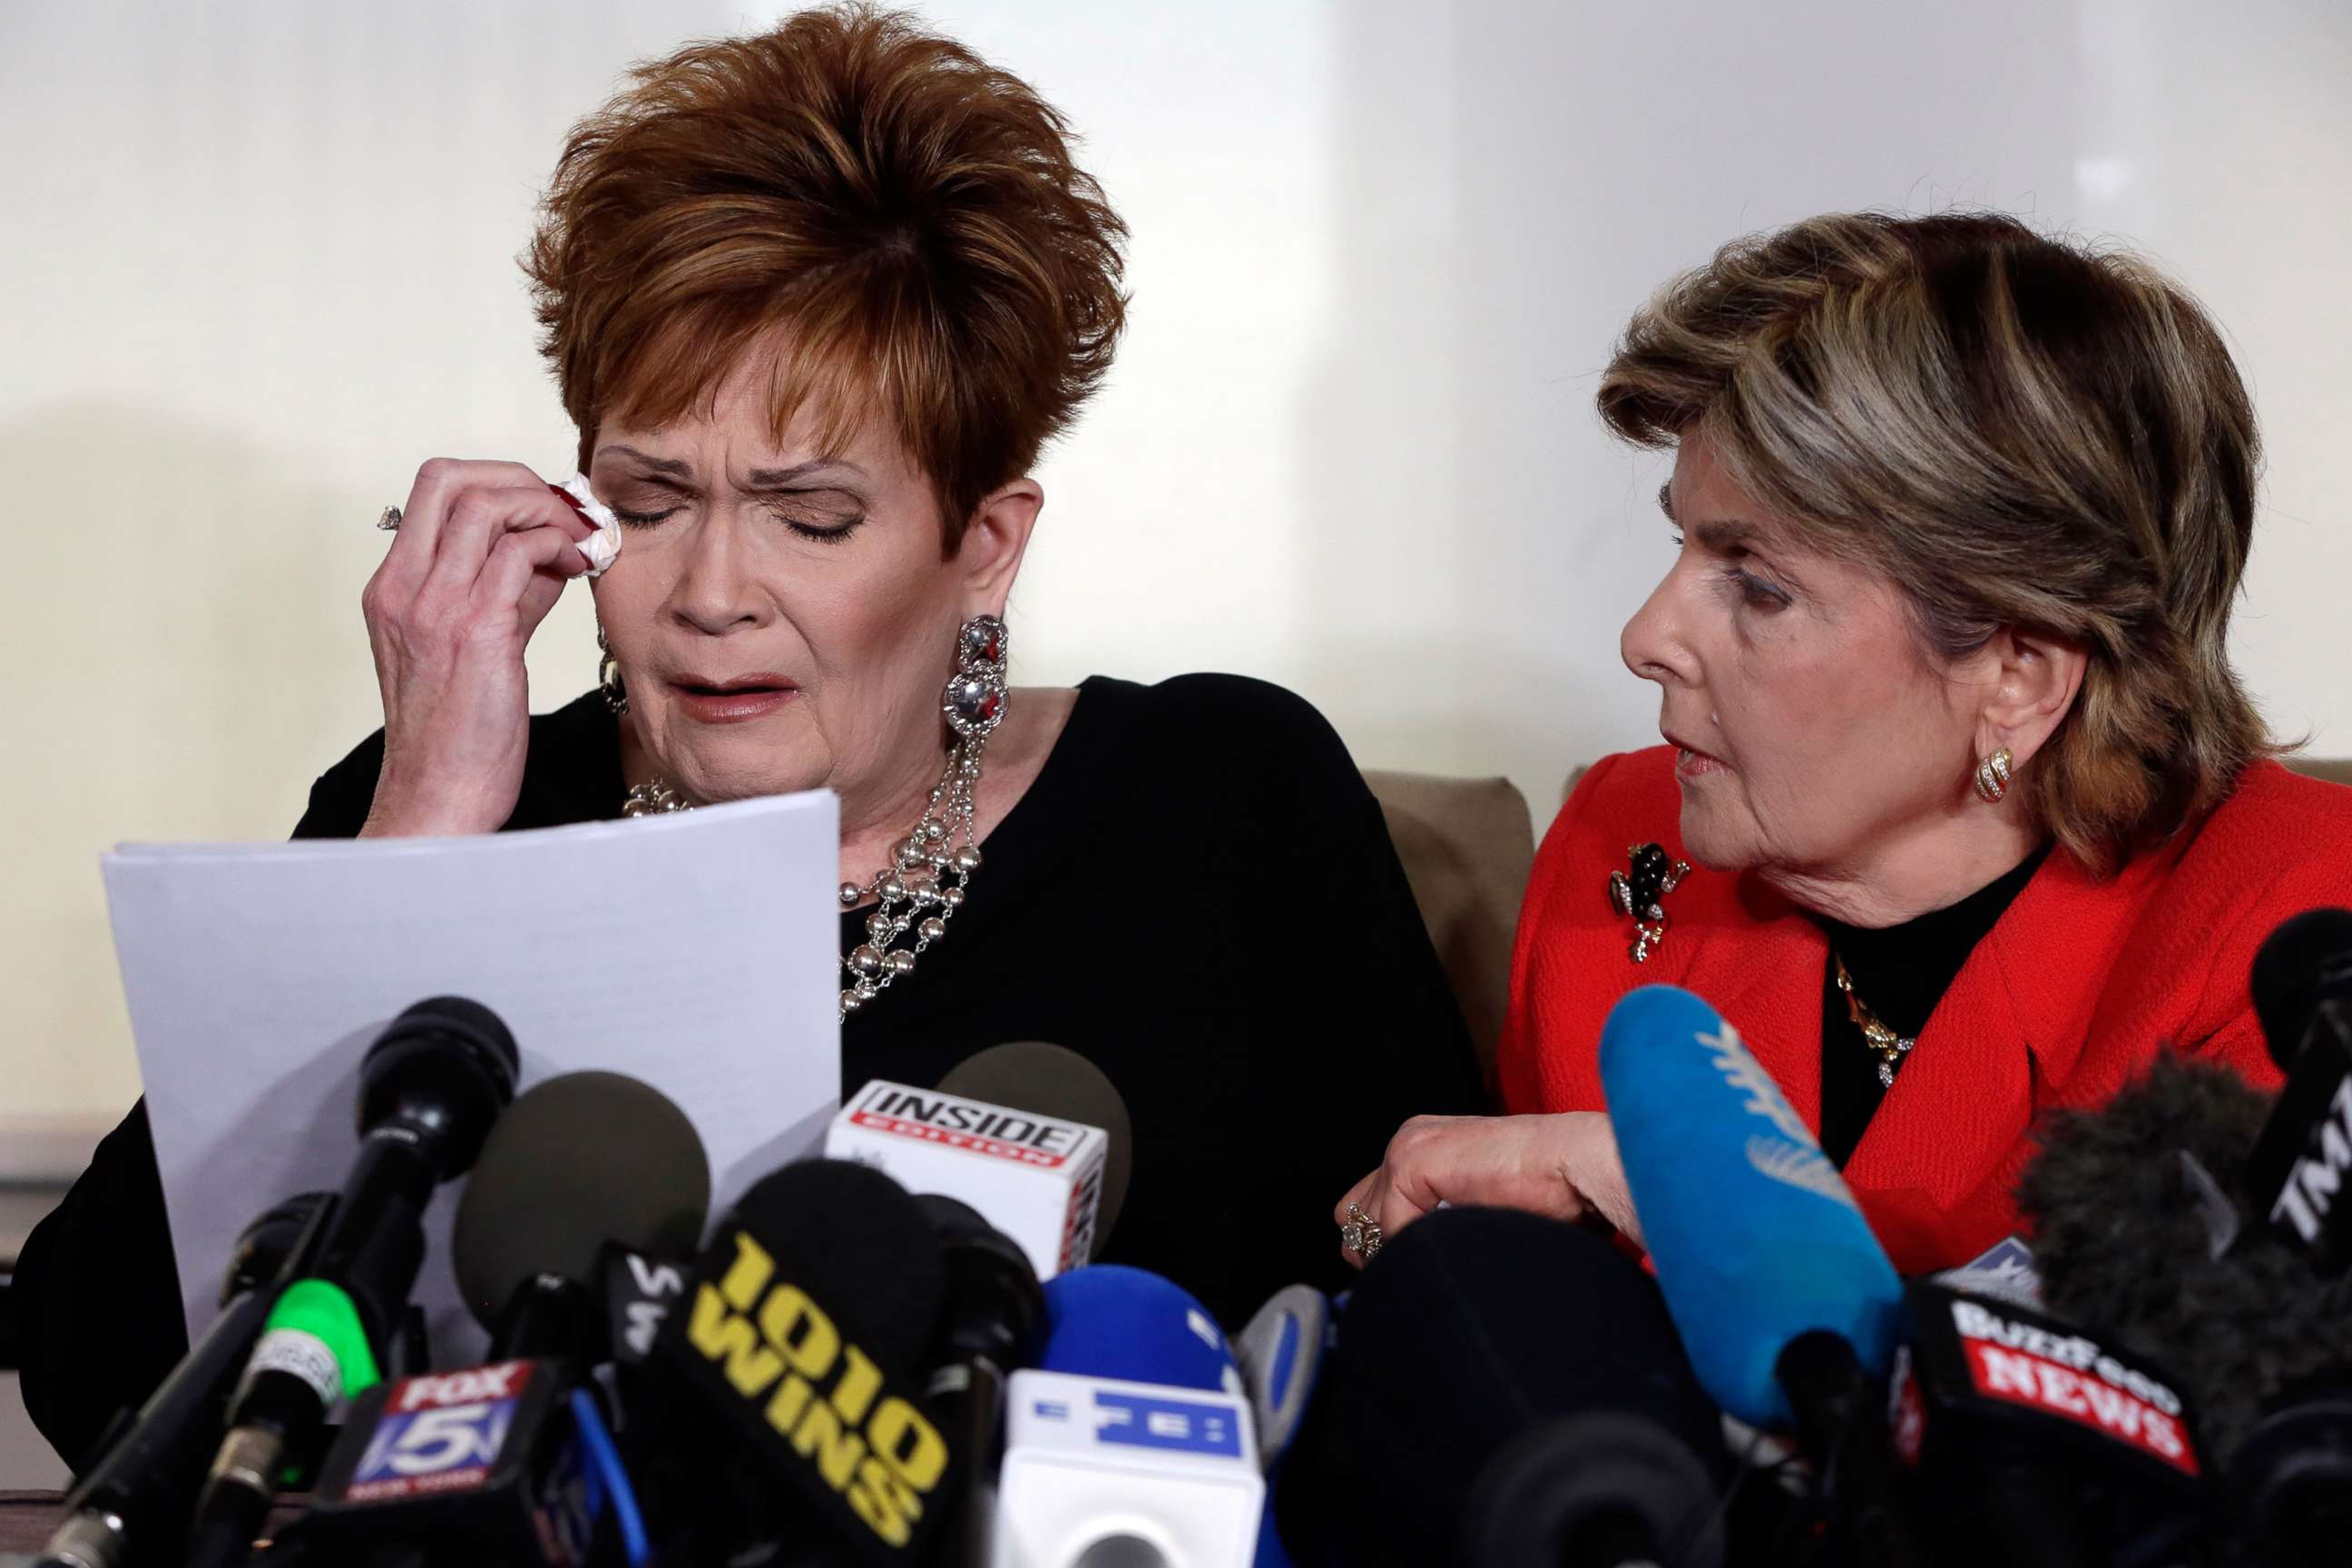 PHOTO: Beverly Young Nelson, left, the latest accuser of Alabama Republican Roy Moore, reads her statement as attorney Gloria Allred looks on, at a news conference, in New York, Nov. 13, 2017.